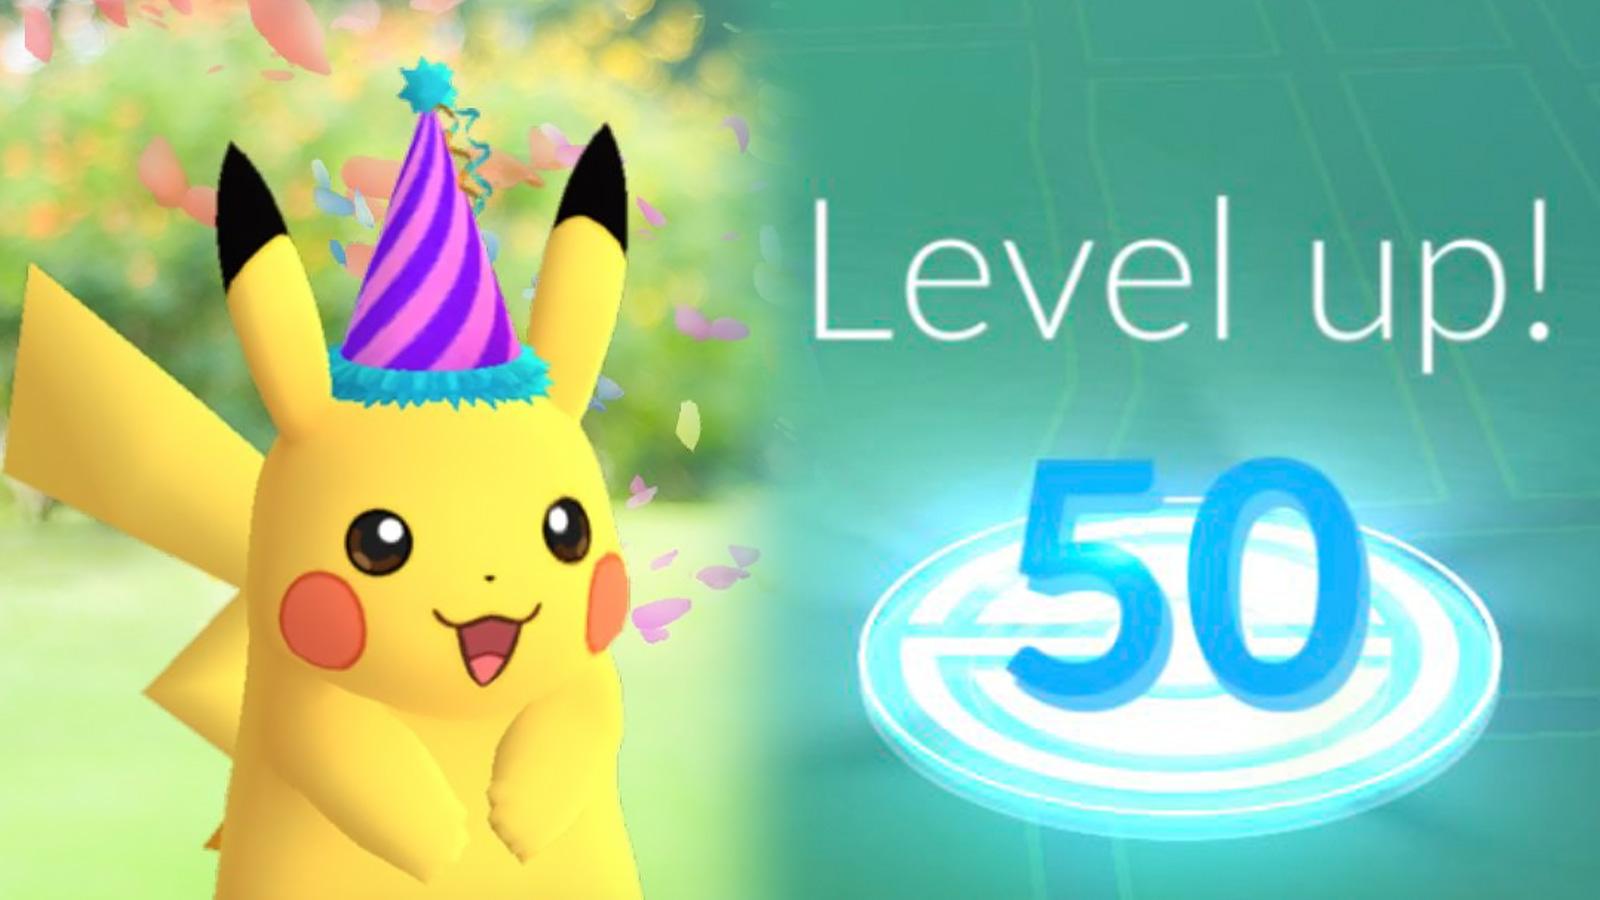 Reached level 50 today : r/pokemongo